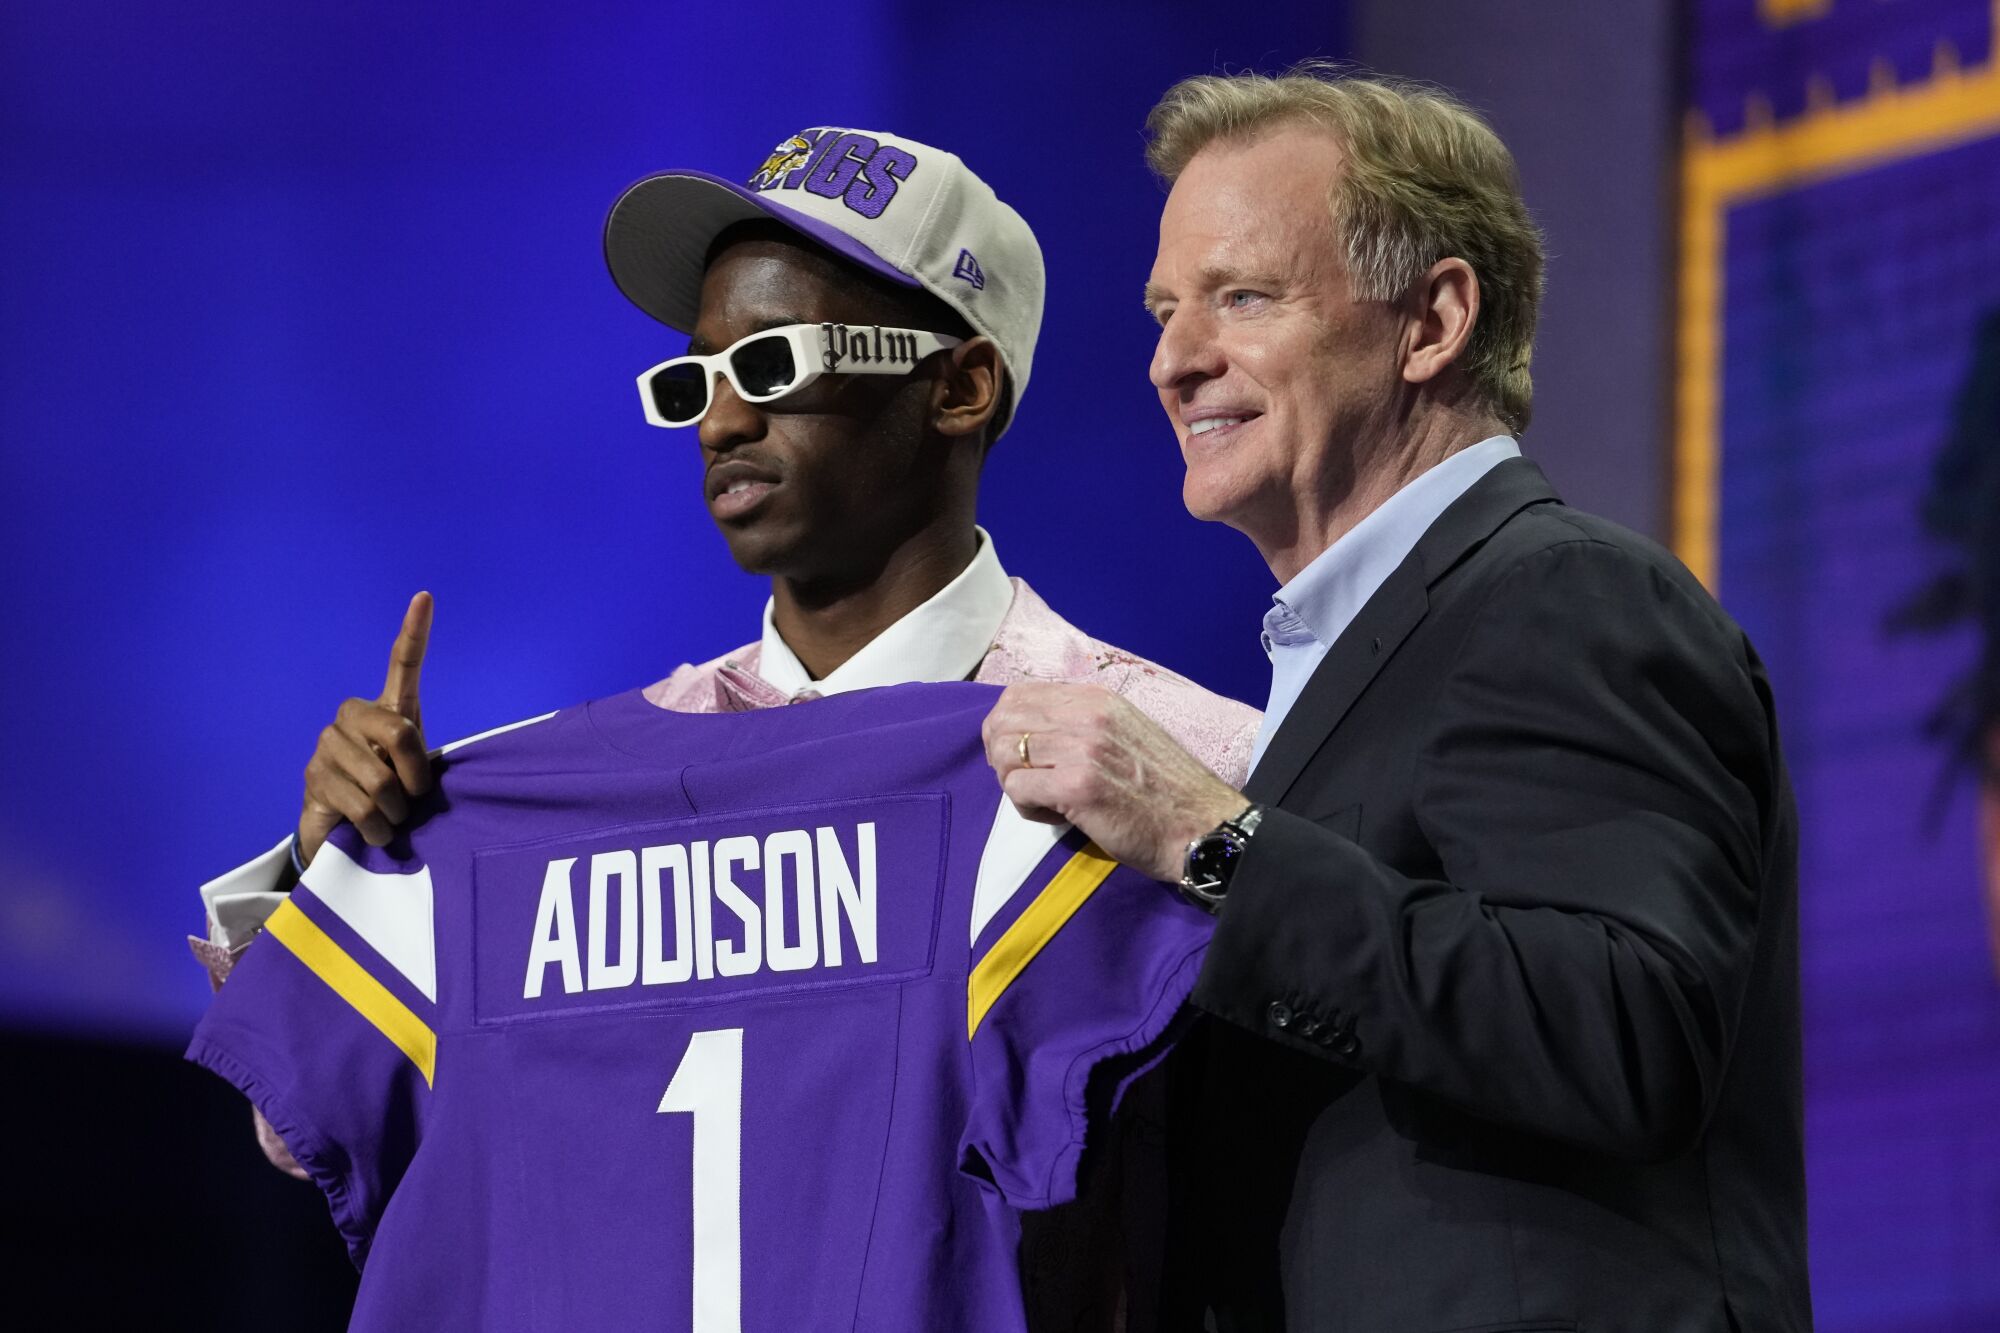 Jordan Addison and Roger Goodell hold a Vikings jersey.